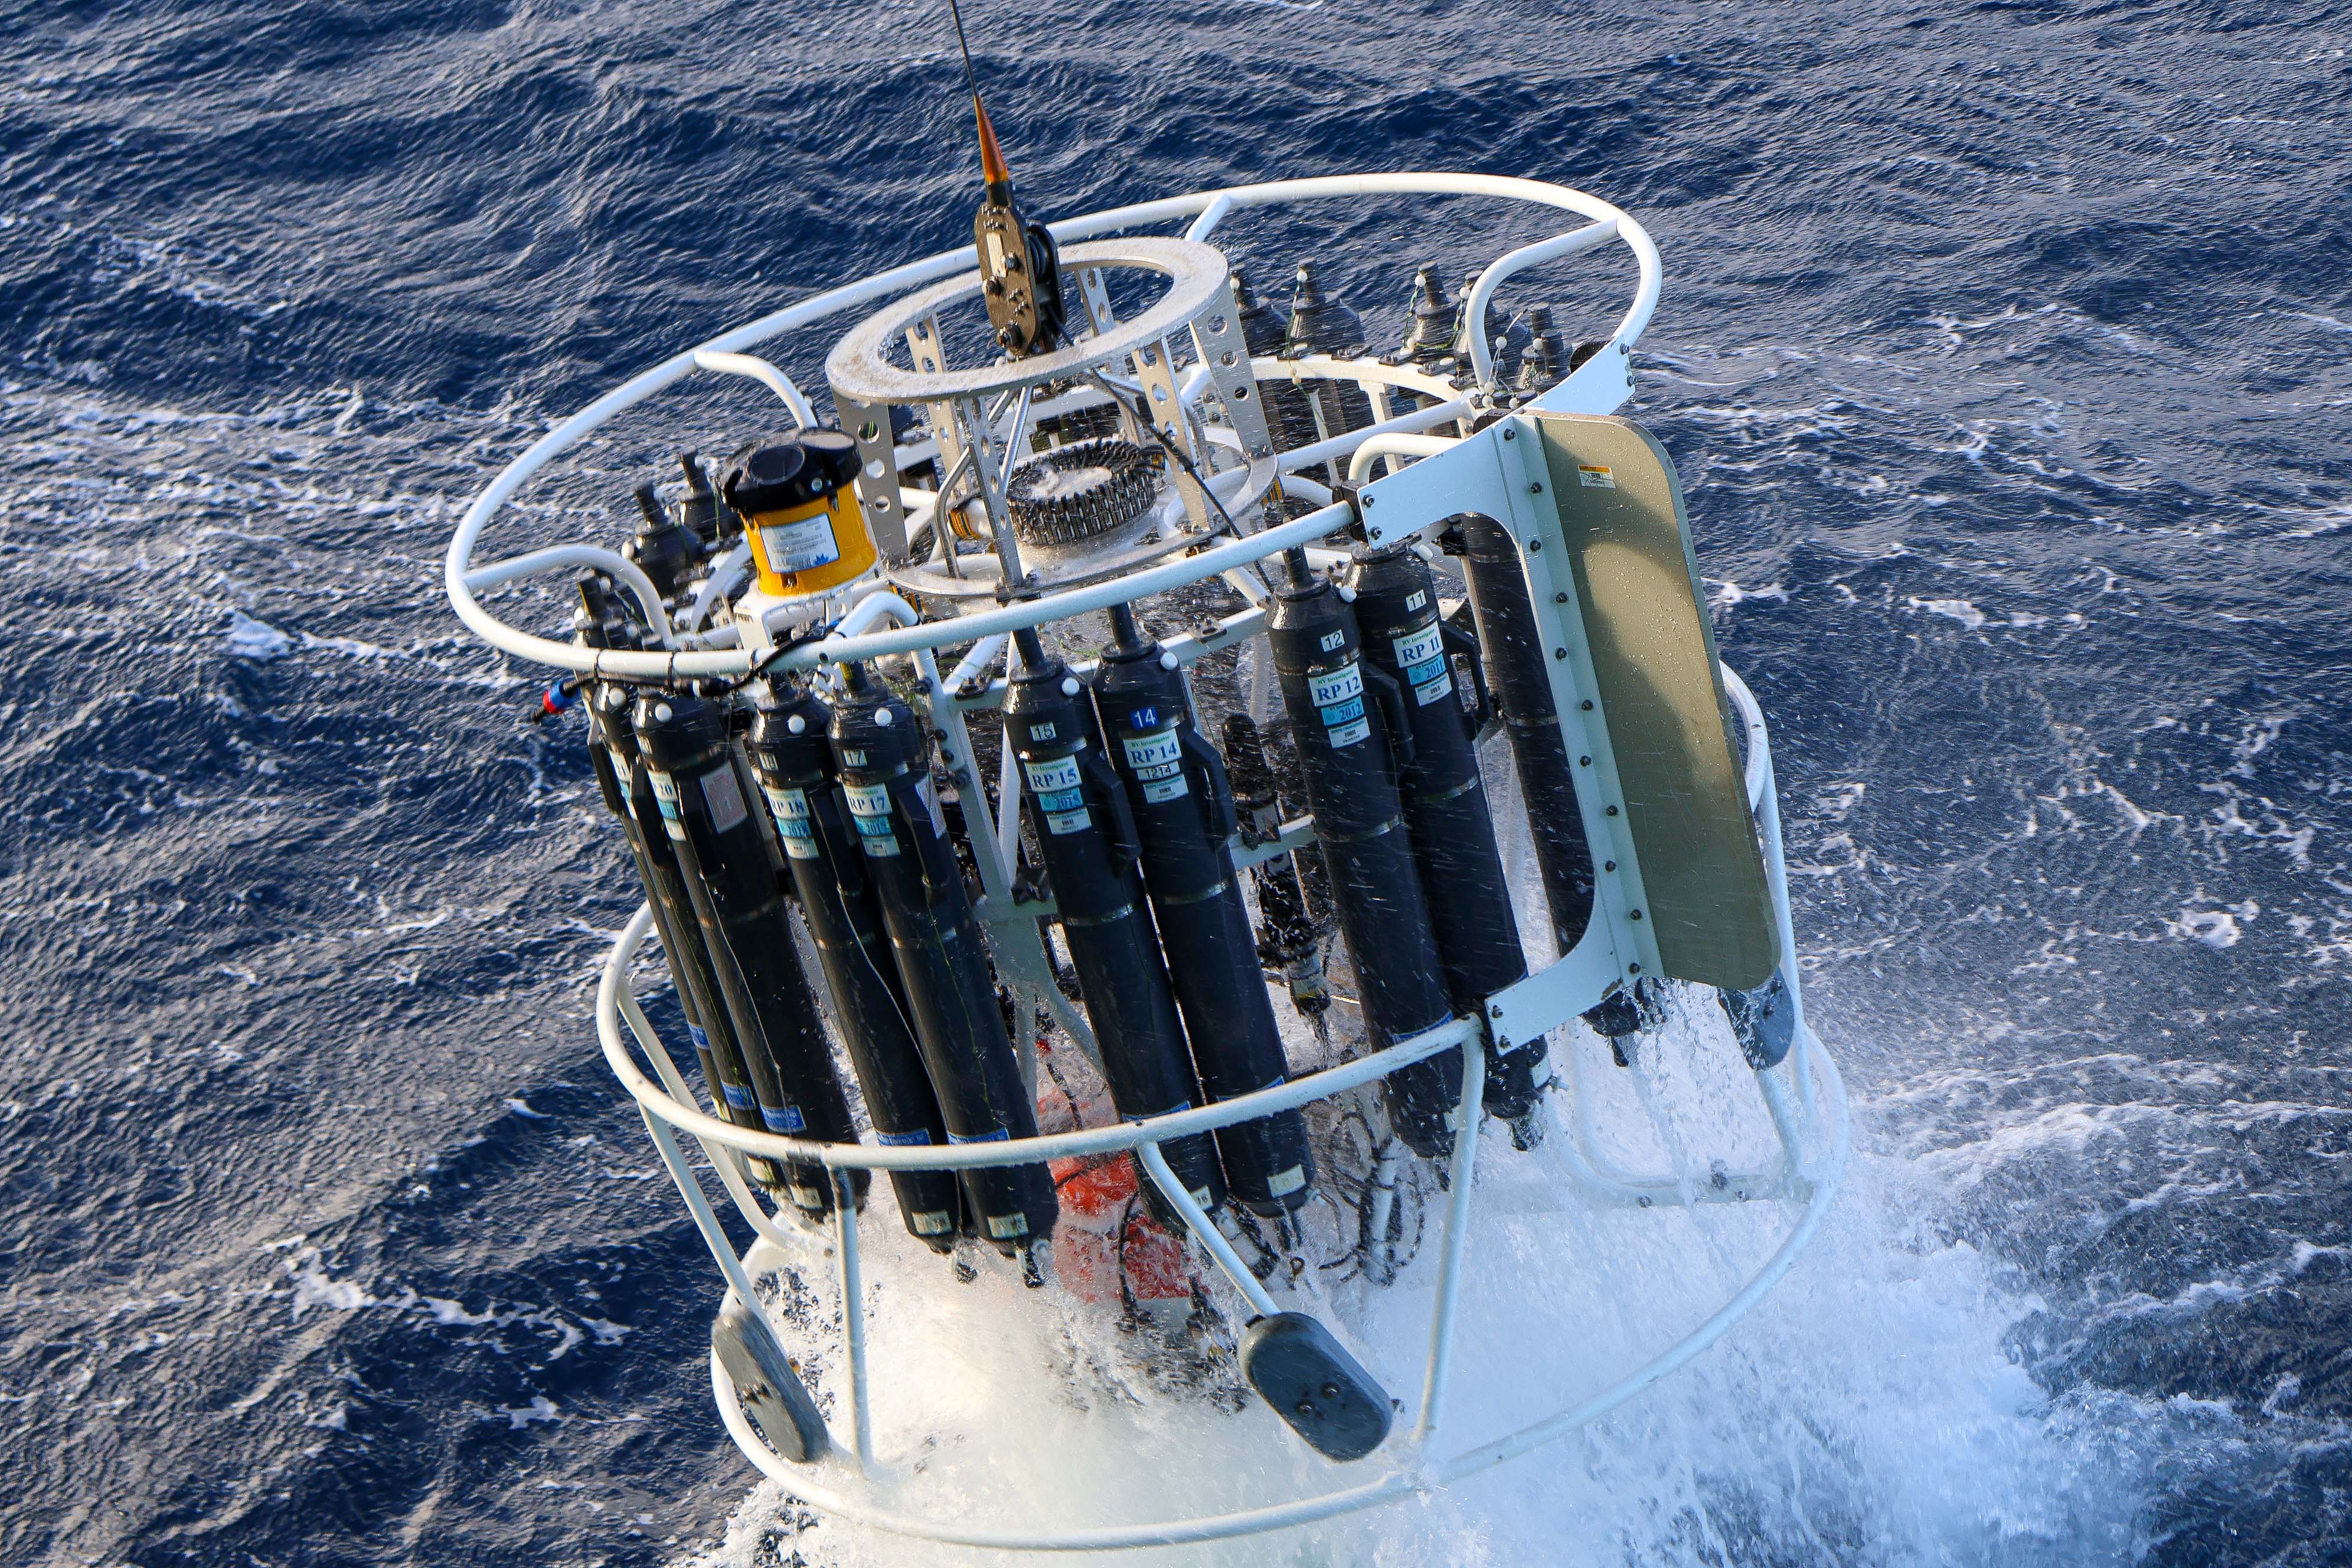 2 CTD rosette emerges from the deep with water samples photo Mark Horstman